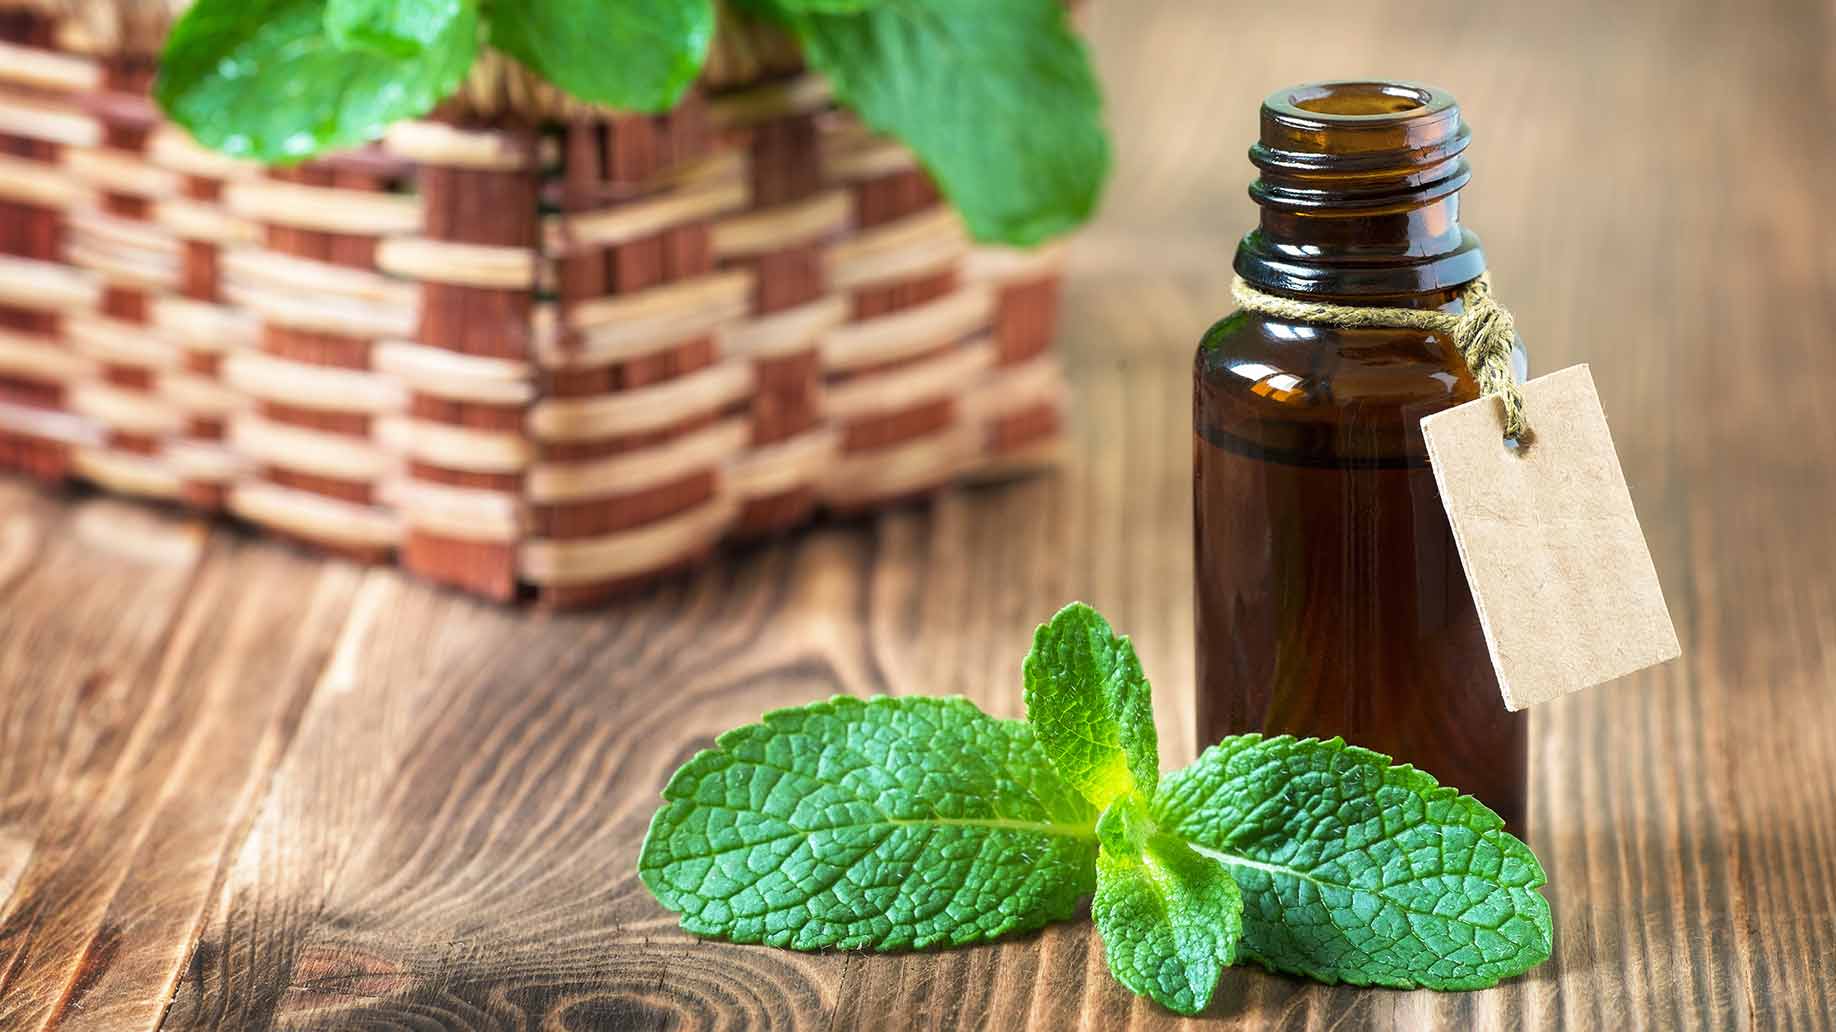 peppermint oil aromatherapy leaves increase boost energy levels natural remedies.